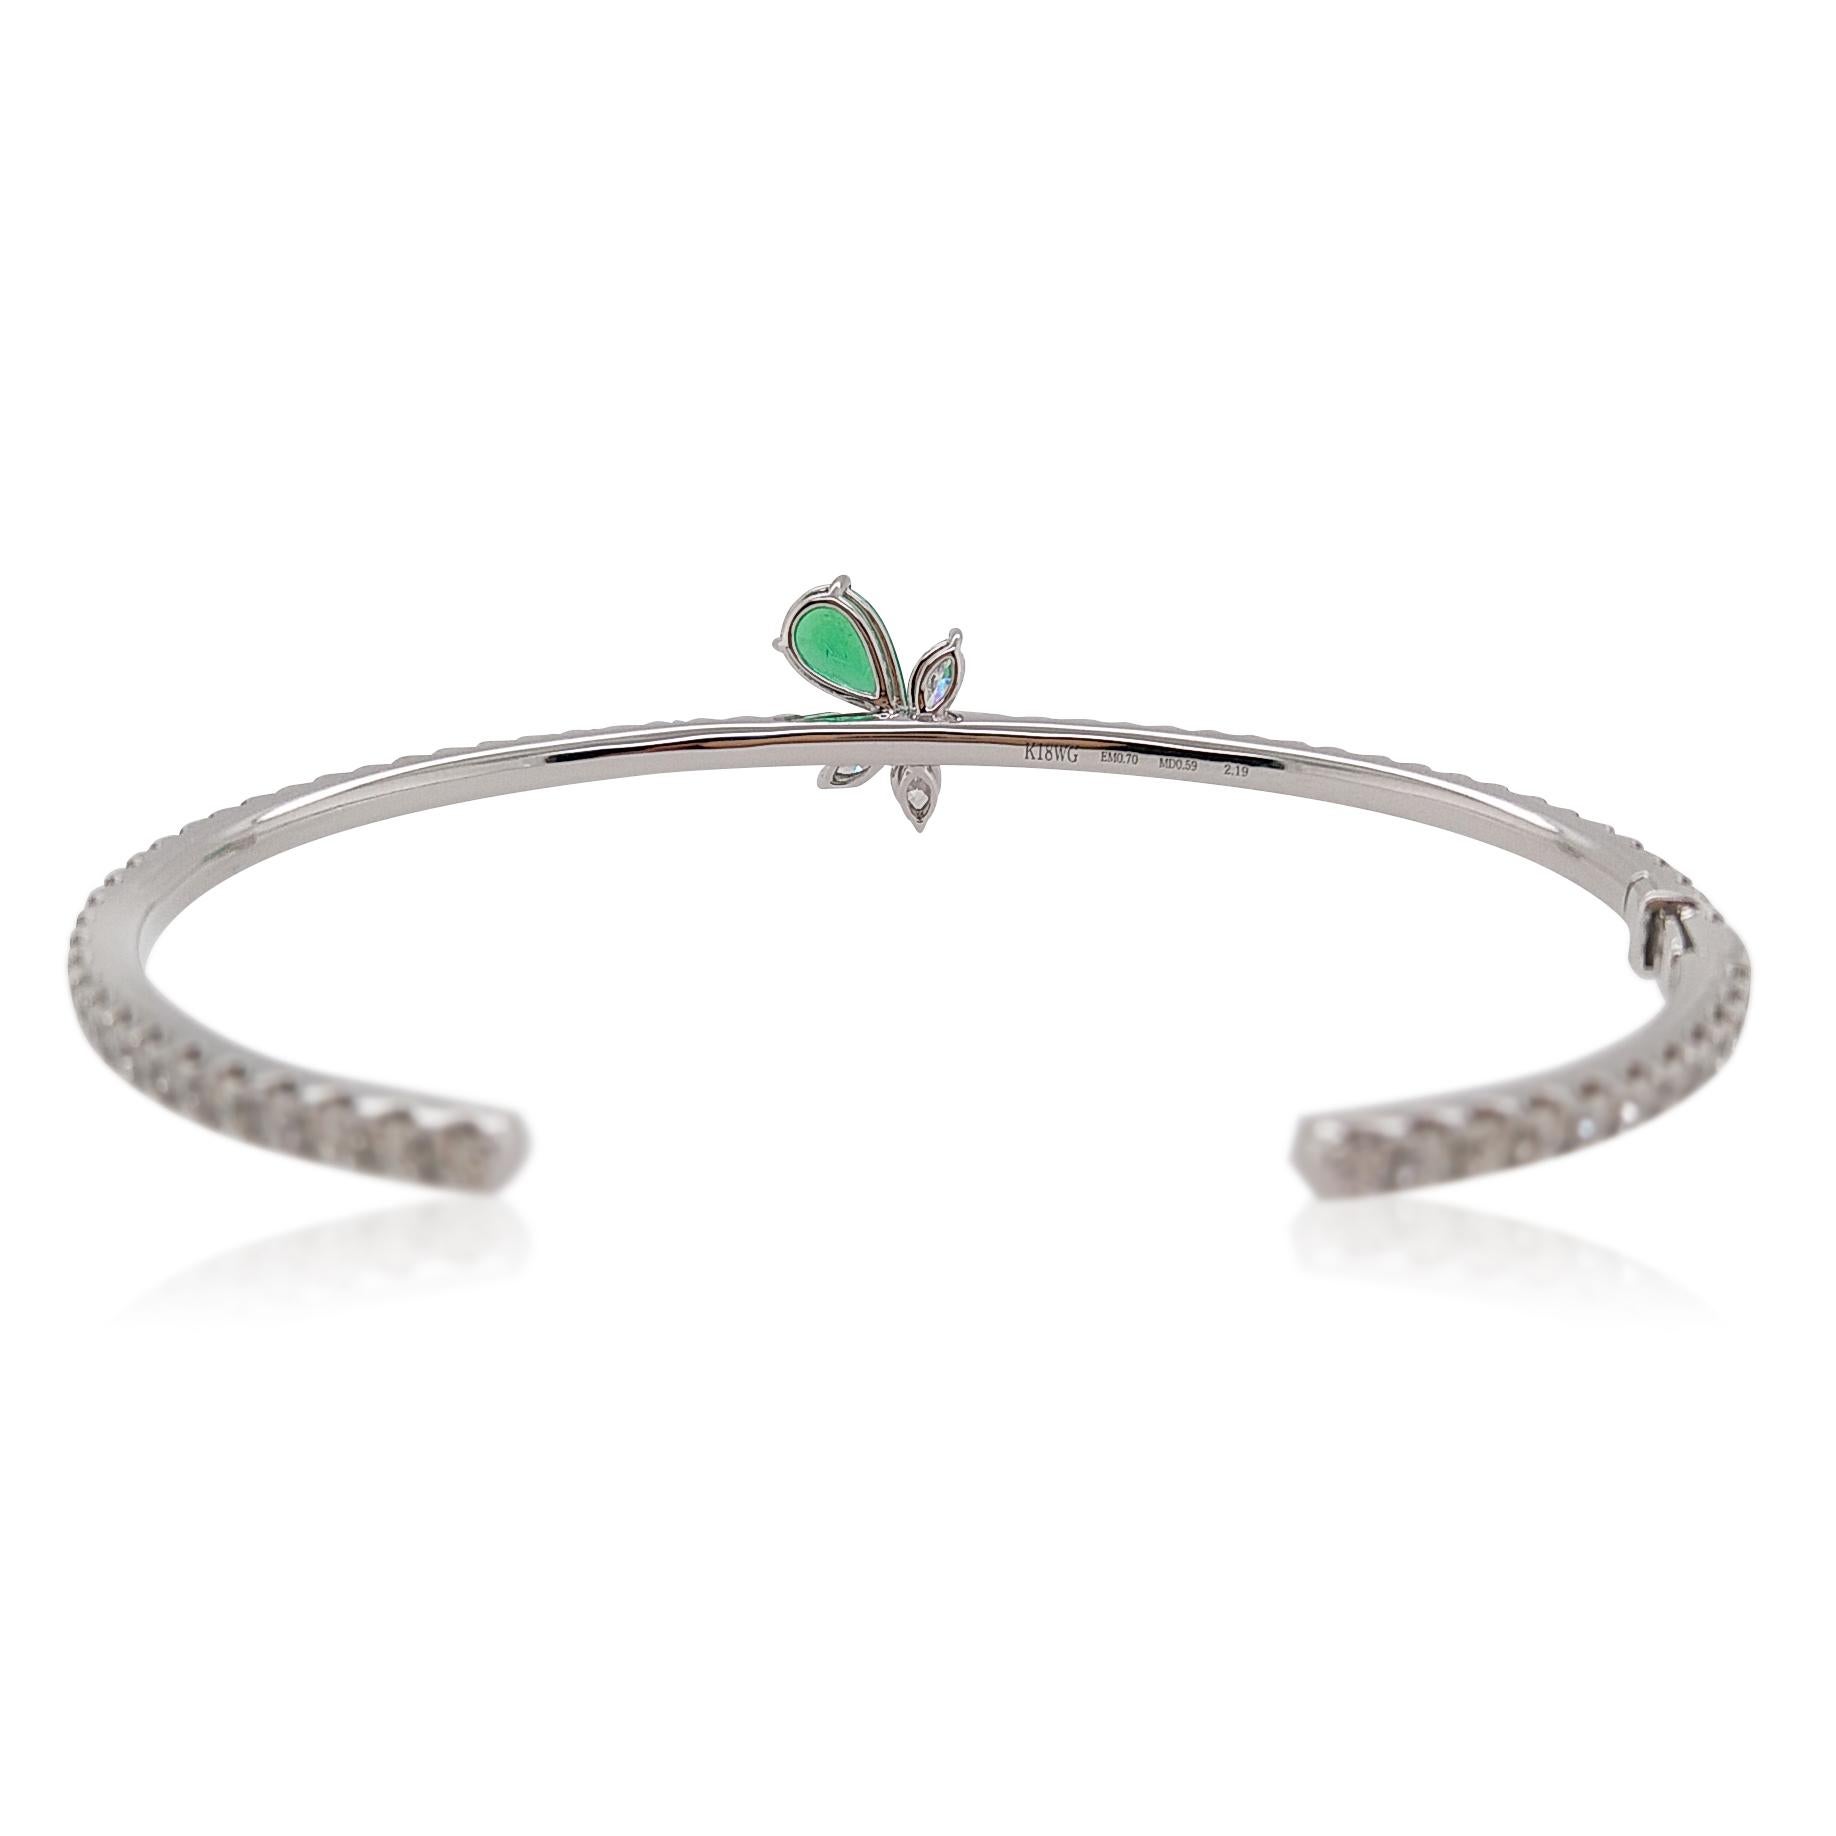 This stunning 18 Karat white gold bangle is featured with dazzling Colombian Emerald and sparkling White Diamonds. With the vibrant and unique color, pair with any outfit to add a unique and remarkable finish.
-	Pear shape Colombian Emerald 0.70